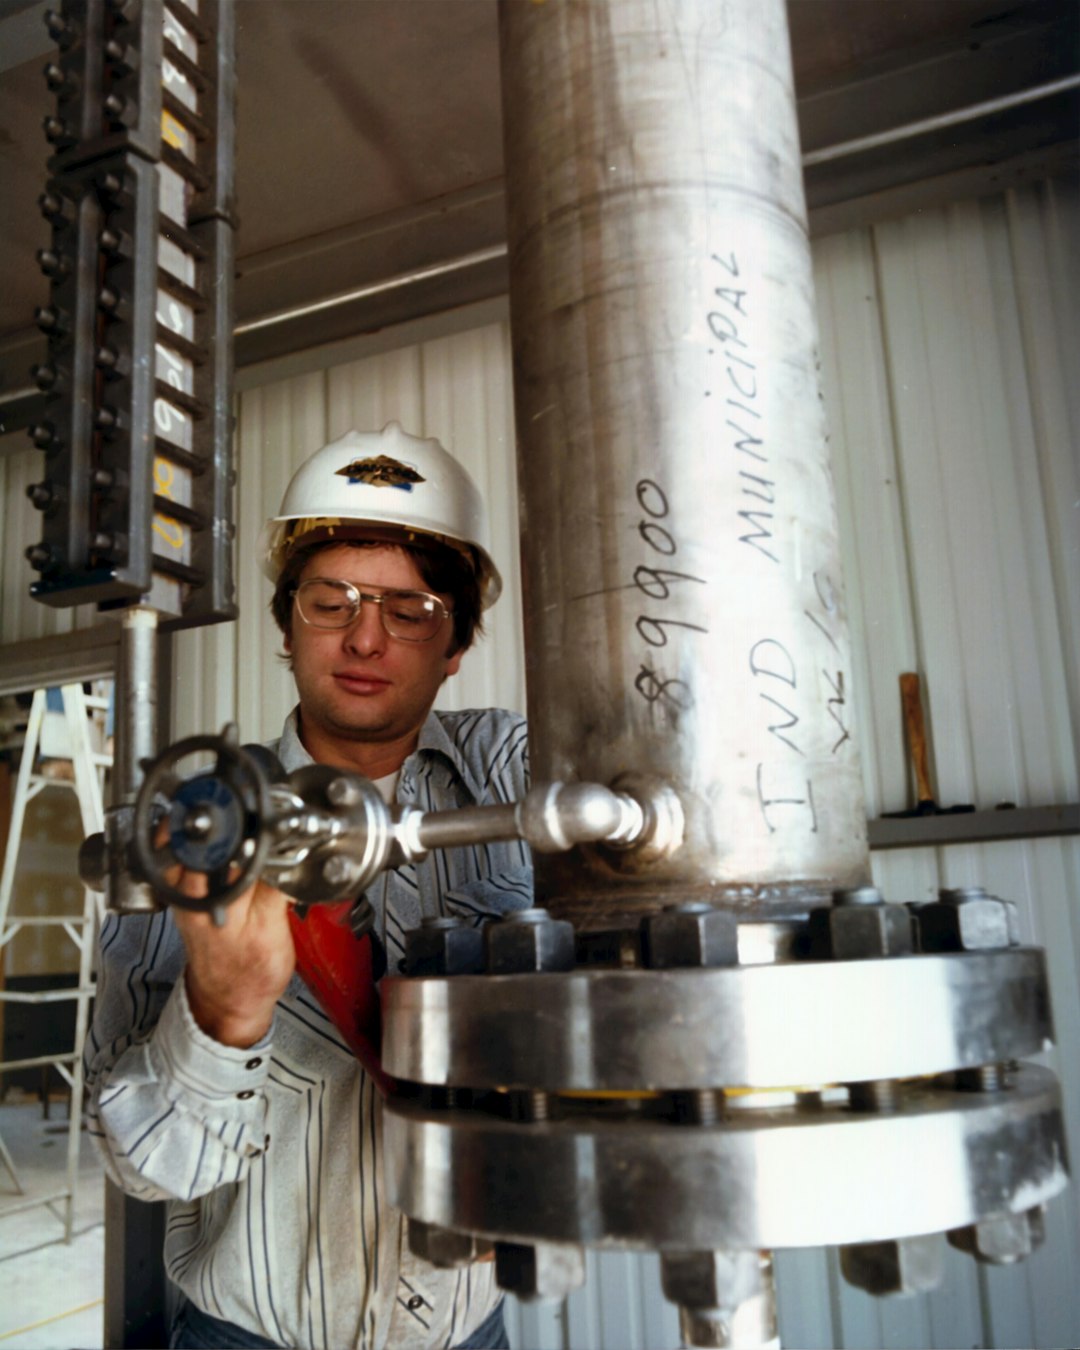 CRAFTSMAN WORKS ON THE LOWER PART OF THE REACTOR DURING CONSTRUCTION OF THE CATALYTIC COAL GASIFICATION UNIT.